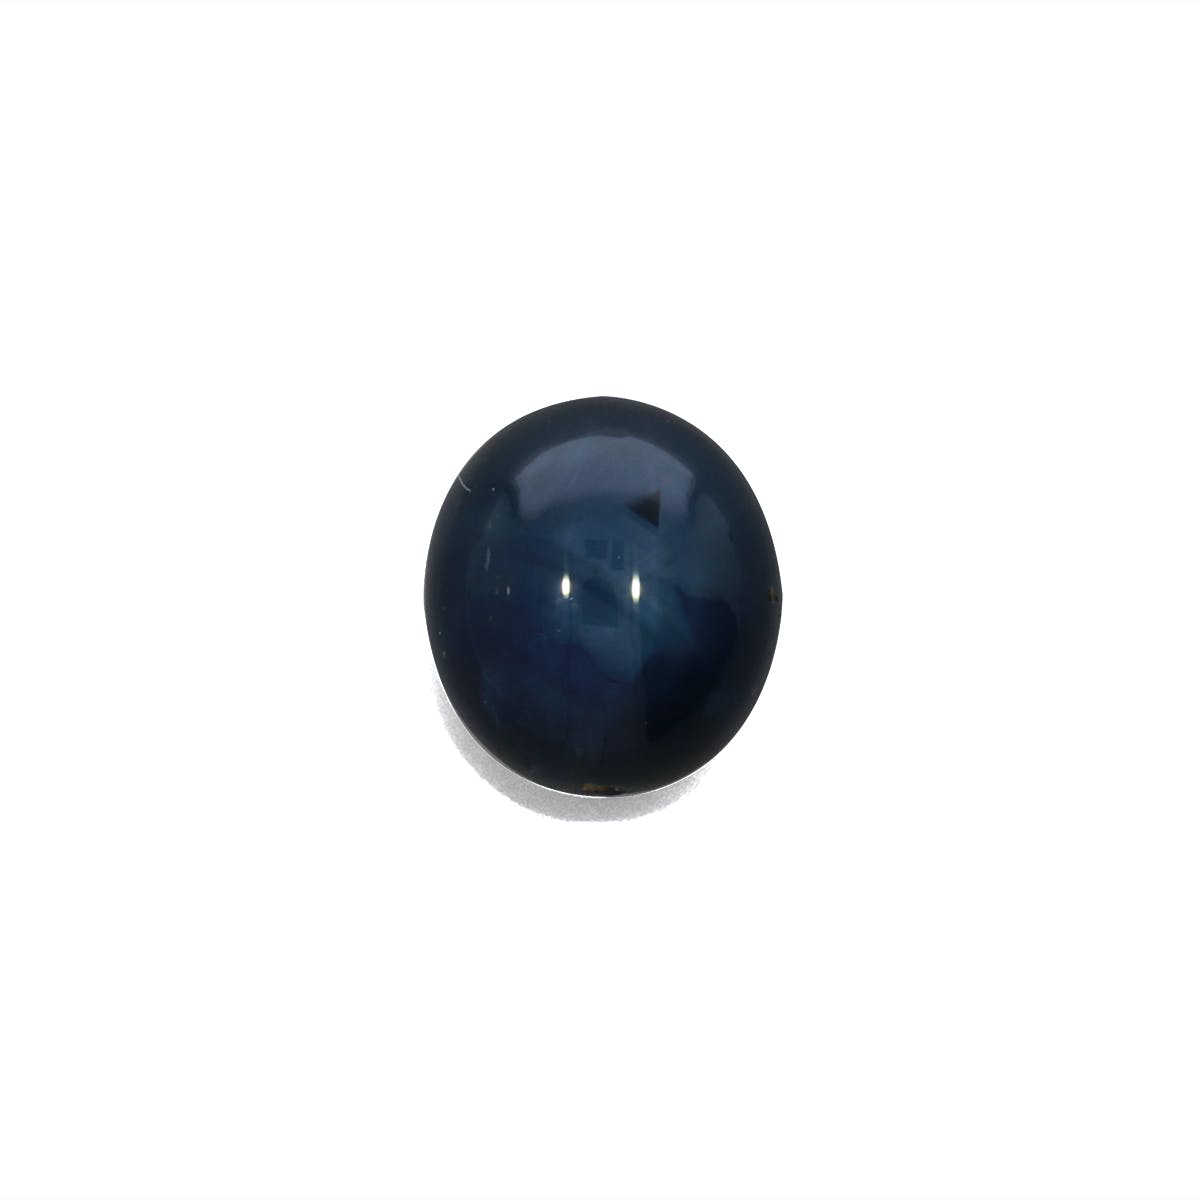 Picture of Blue Star Sapphire 3.91ct (BR0039)